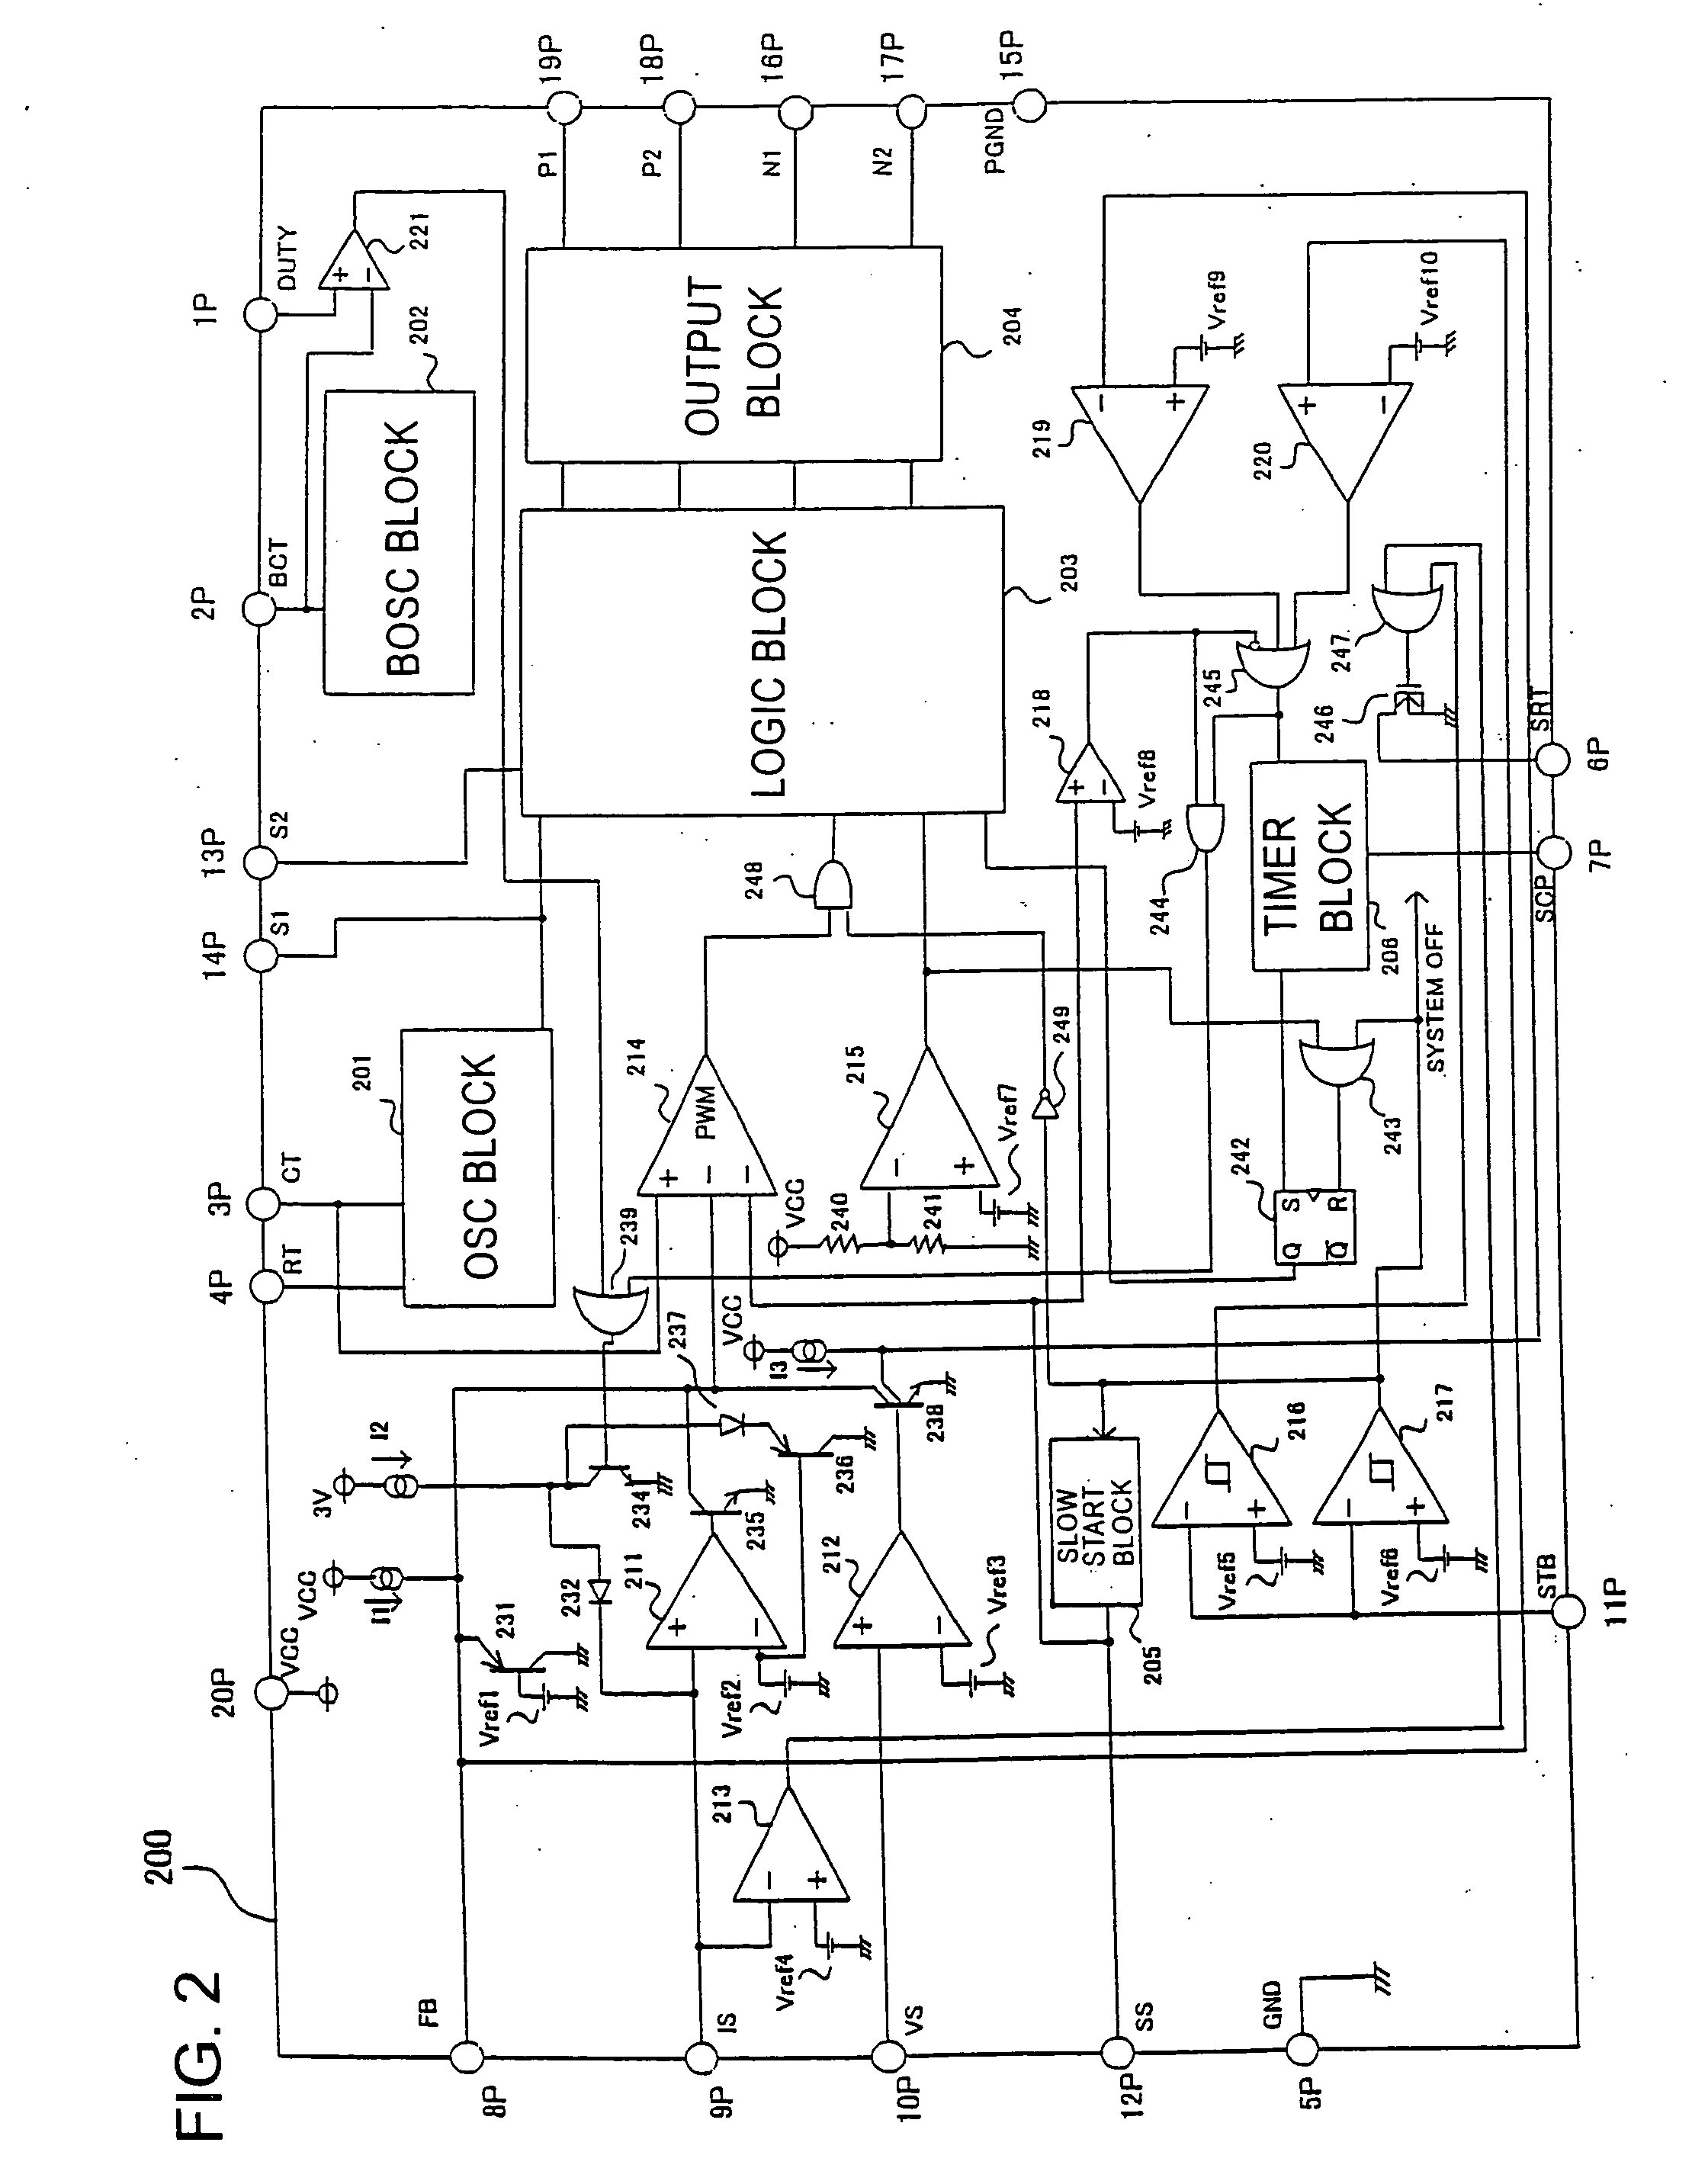 Dc/ac converter and its controller ic